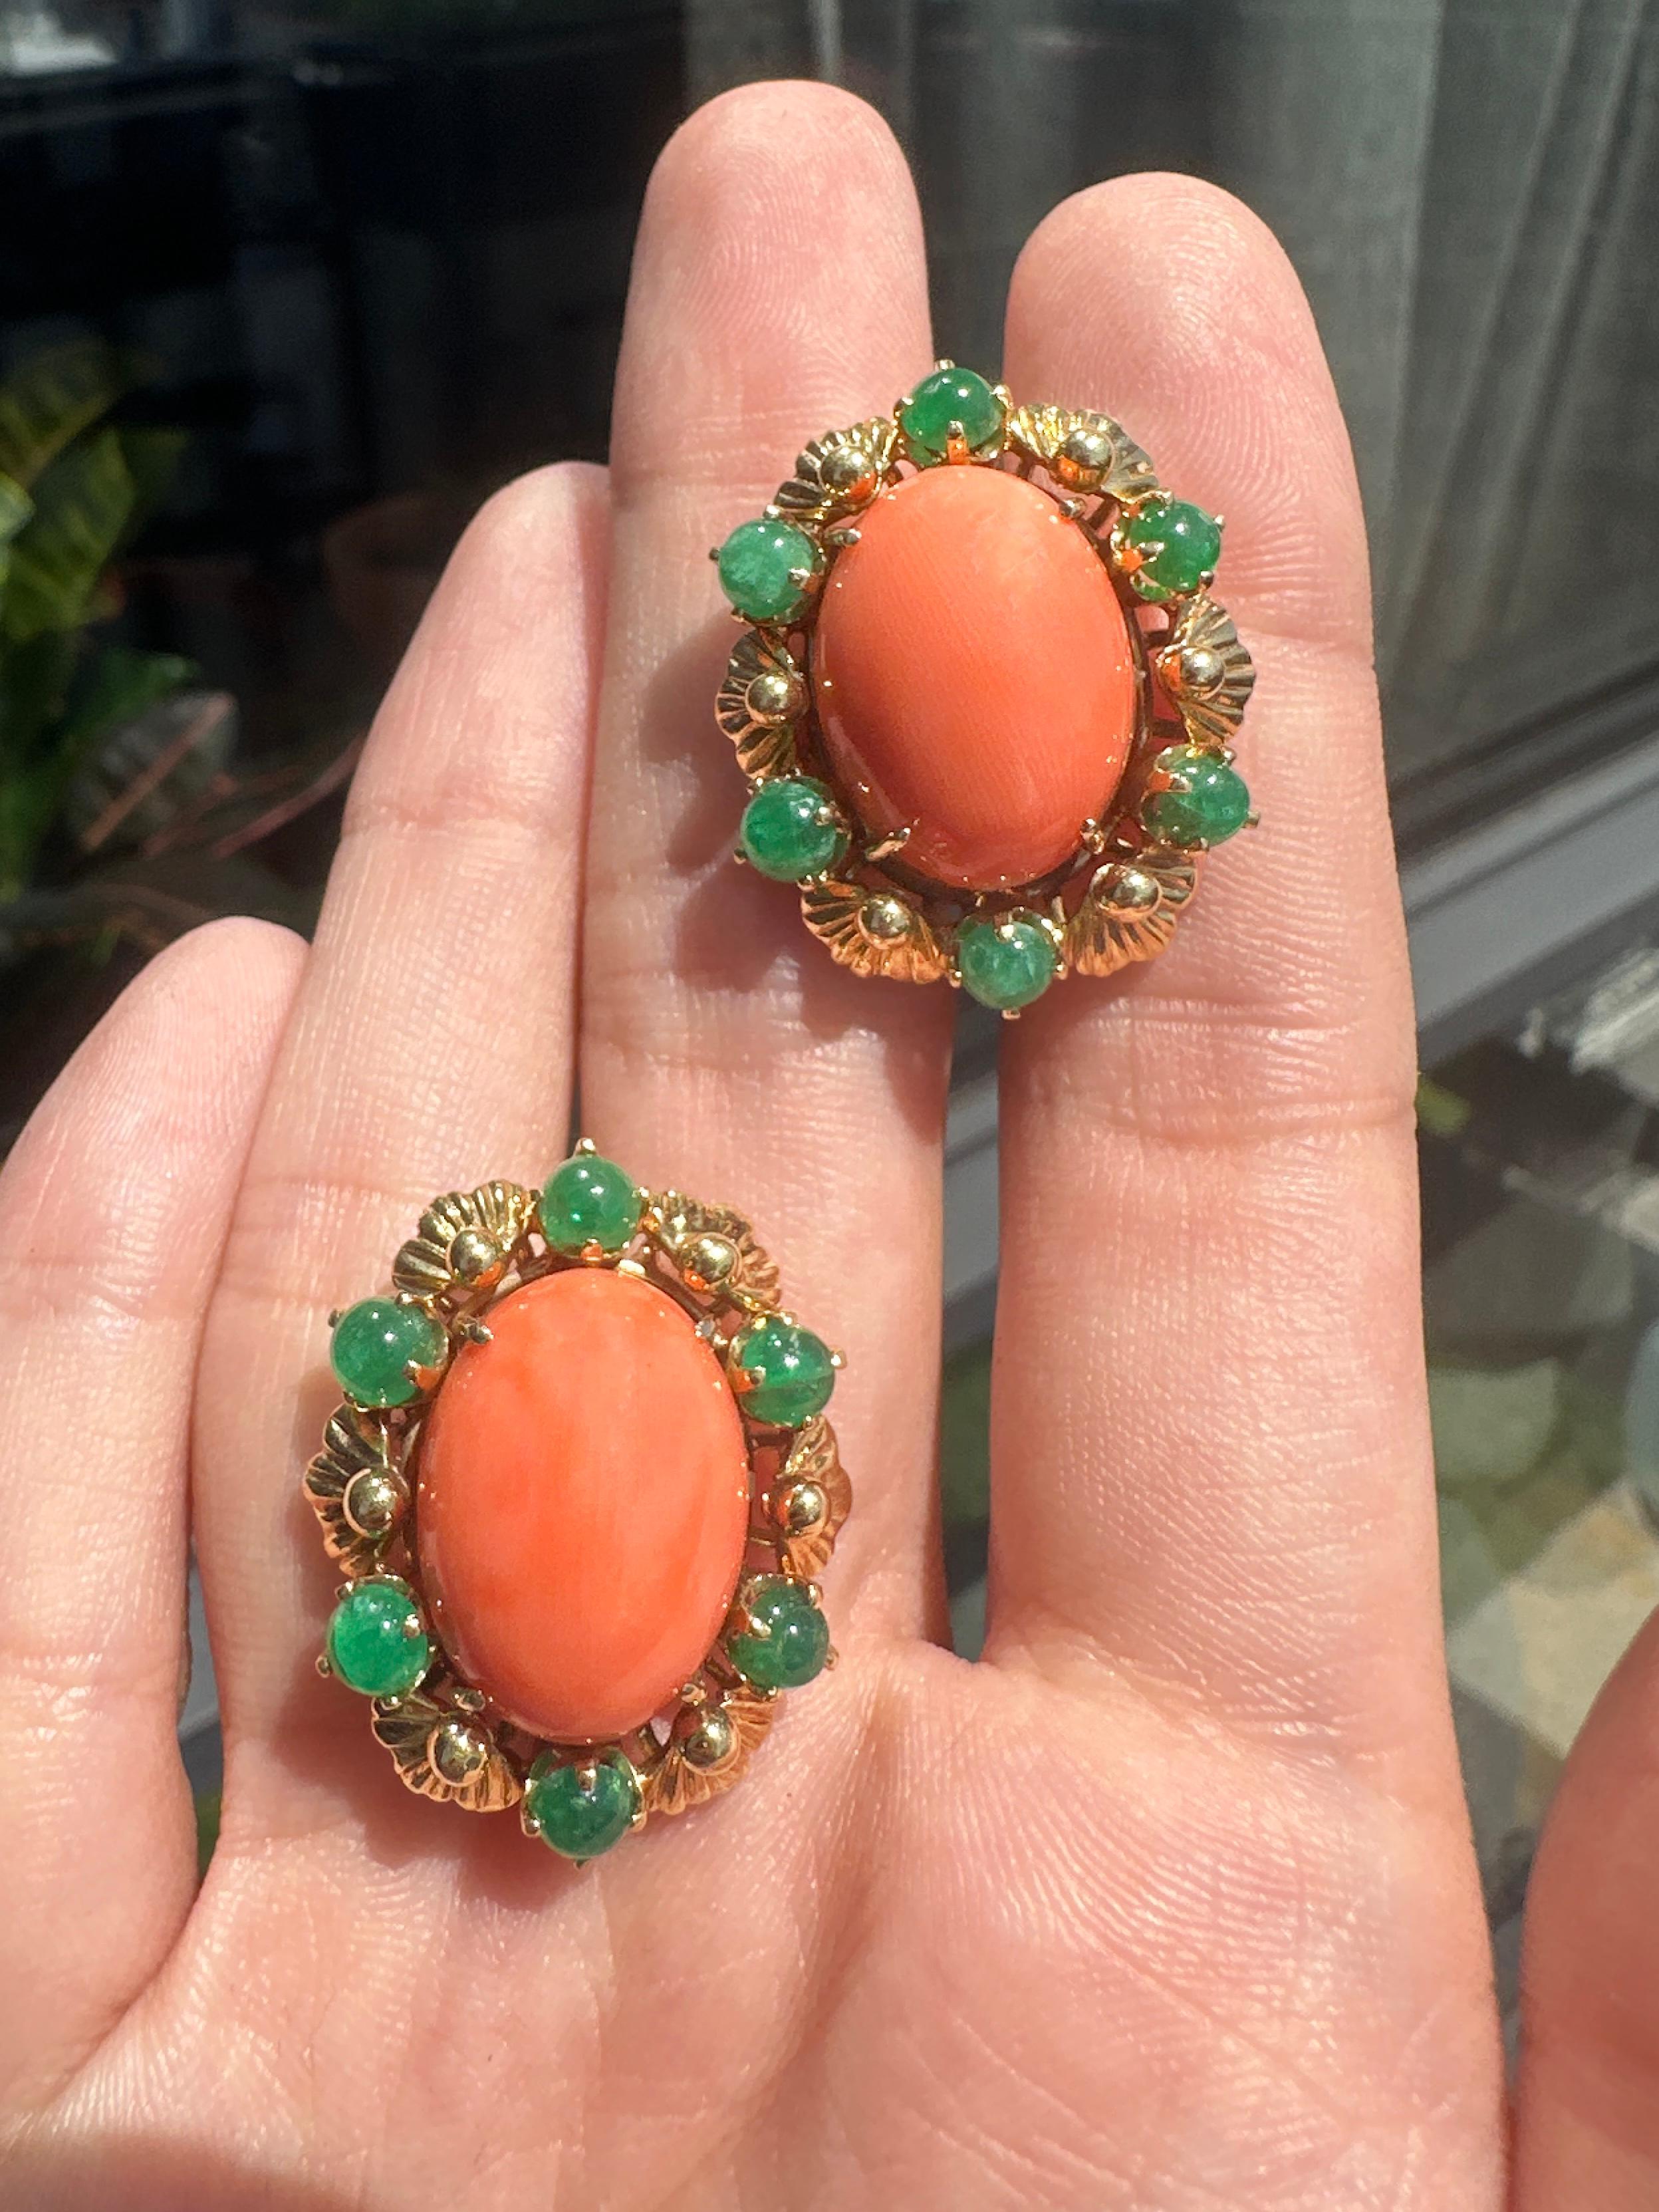 Elevate your jewelry collection with these stunning 18k Yellow Gold Cabochon Orange Stone and Emerald Earrings. Crafted from 18k yellow gold, these earrings feature a beautiful cabochon orange stone and approximately 2.50 carats of emeralds. With a